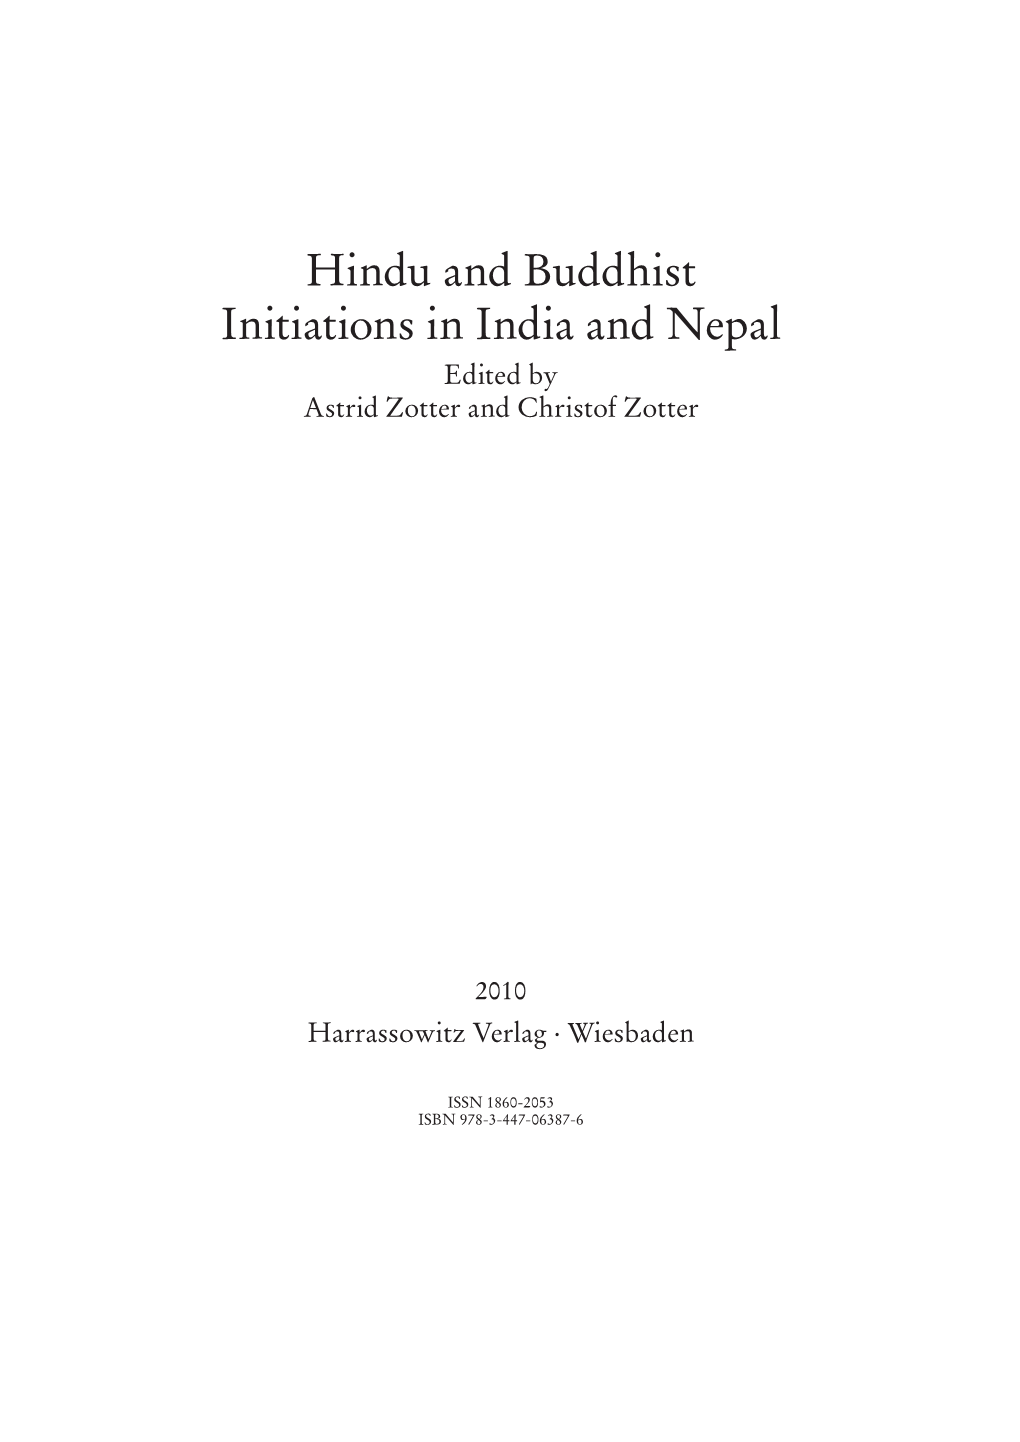 Hindu and Buddhist Initiations in India and Nepal Edited by Astrid Zotter and Christof Zotter